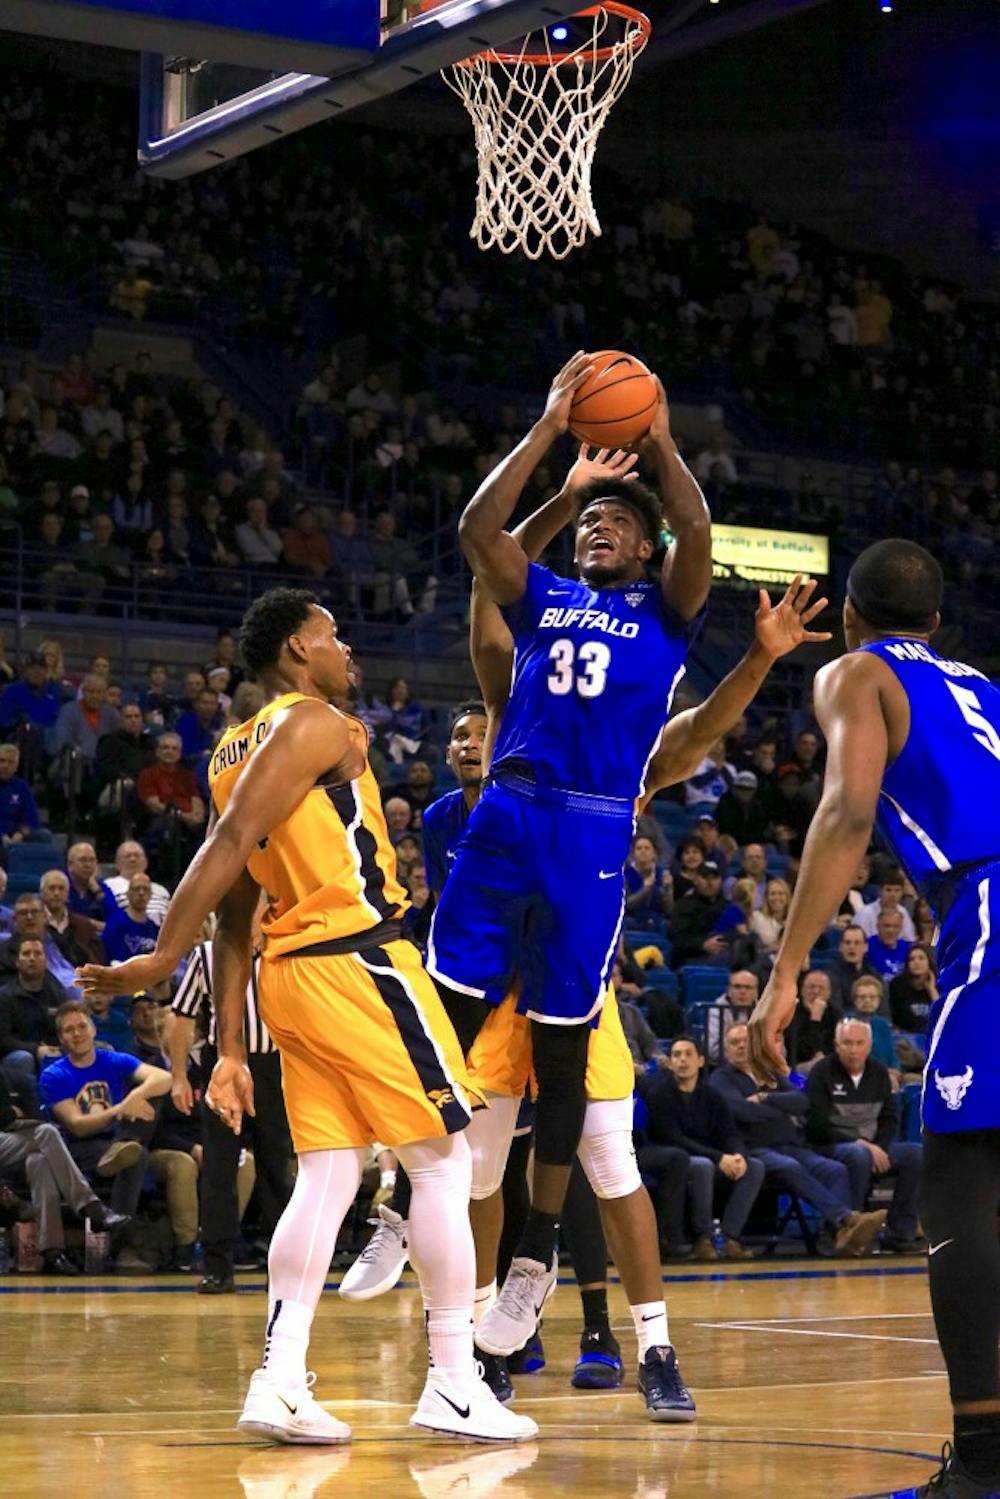 <p>Junior forward Nick Perkins goes up for a shot in between two defenders. Perkins has been a force in the paint for the Bulls so far this season.&nbsp;</p>